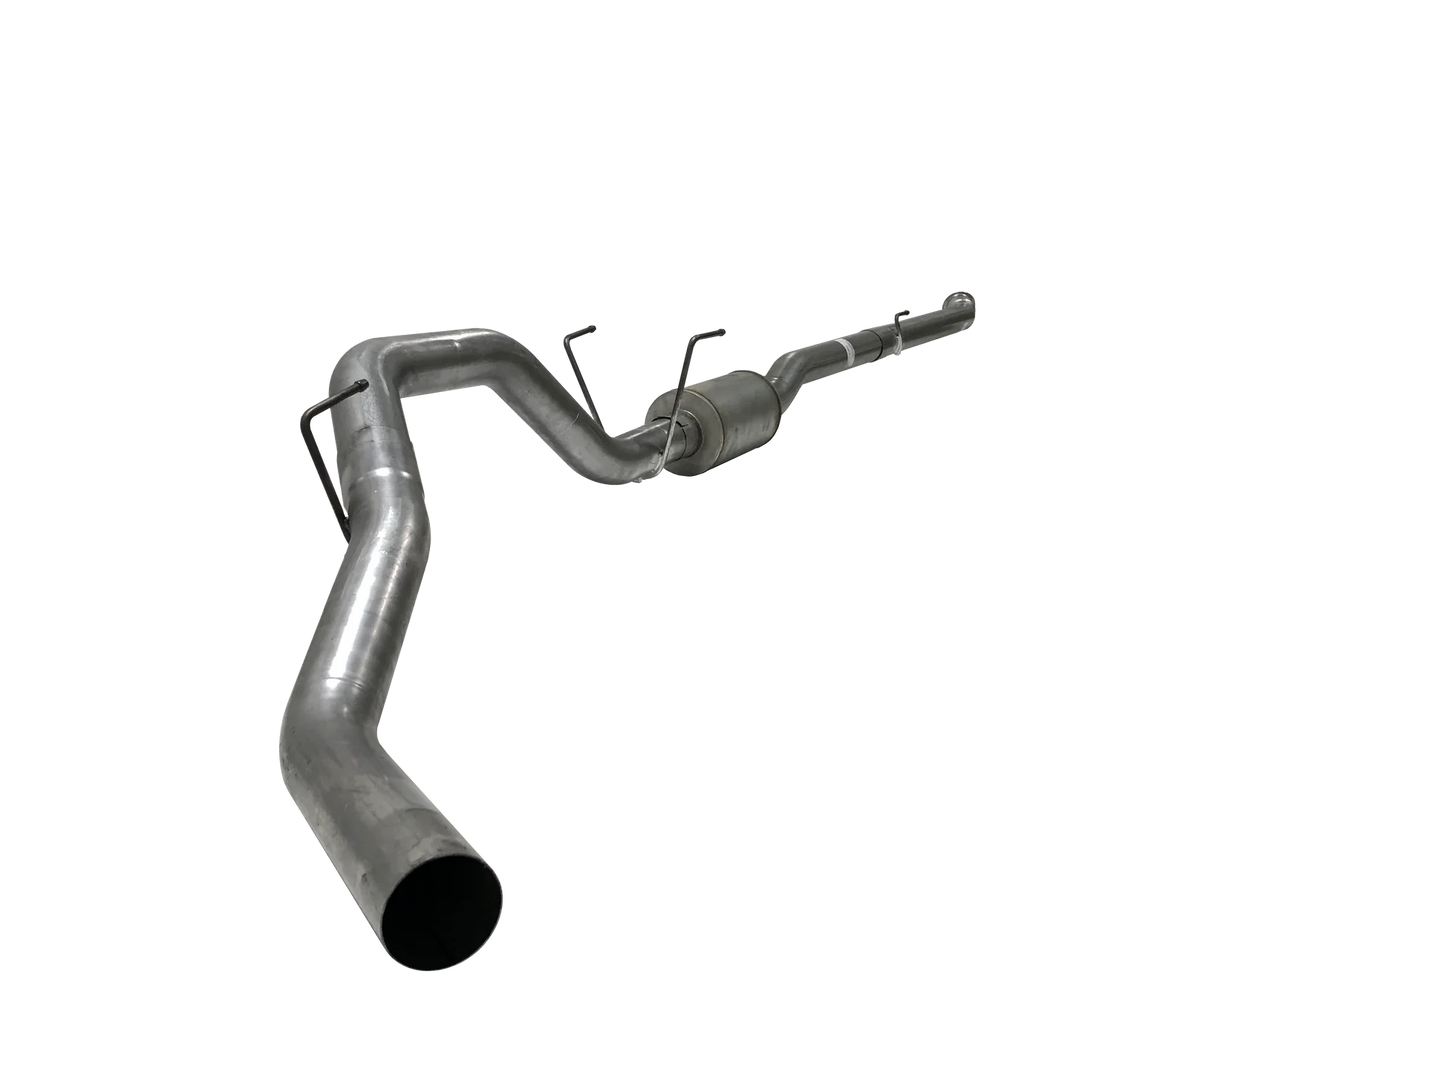 411028 411029 412028 412029 Mel's Manufacturing 4" Flex Pipe Back Single | 2019+ Ram 2500/3500 6.7L Cummins  Mels Mfg FloPro Flo-Pro Flo Pro Hell On Wheels Performance Ltd Limited Canadian Owned and Operated Online Diesel Parts Distribution & Wholesale Supply Center in Alberta Canada Shipping Supplying to Alberta British Columbia Sask Saskatchewan Manitoba Ontario Quebec Newfoundland Labrador New Brunswick Nova Scotia Prince Edward Island AB BC SK MB ON QC PQ NS NB NFLD N.L. PEI